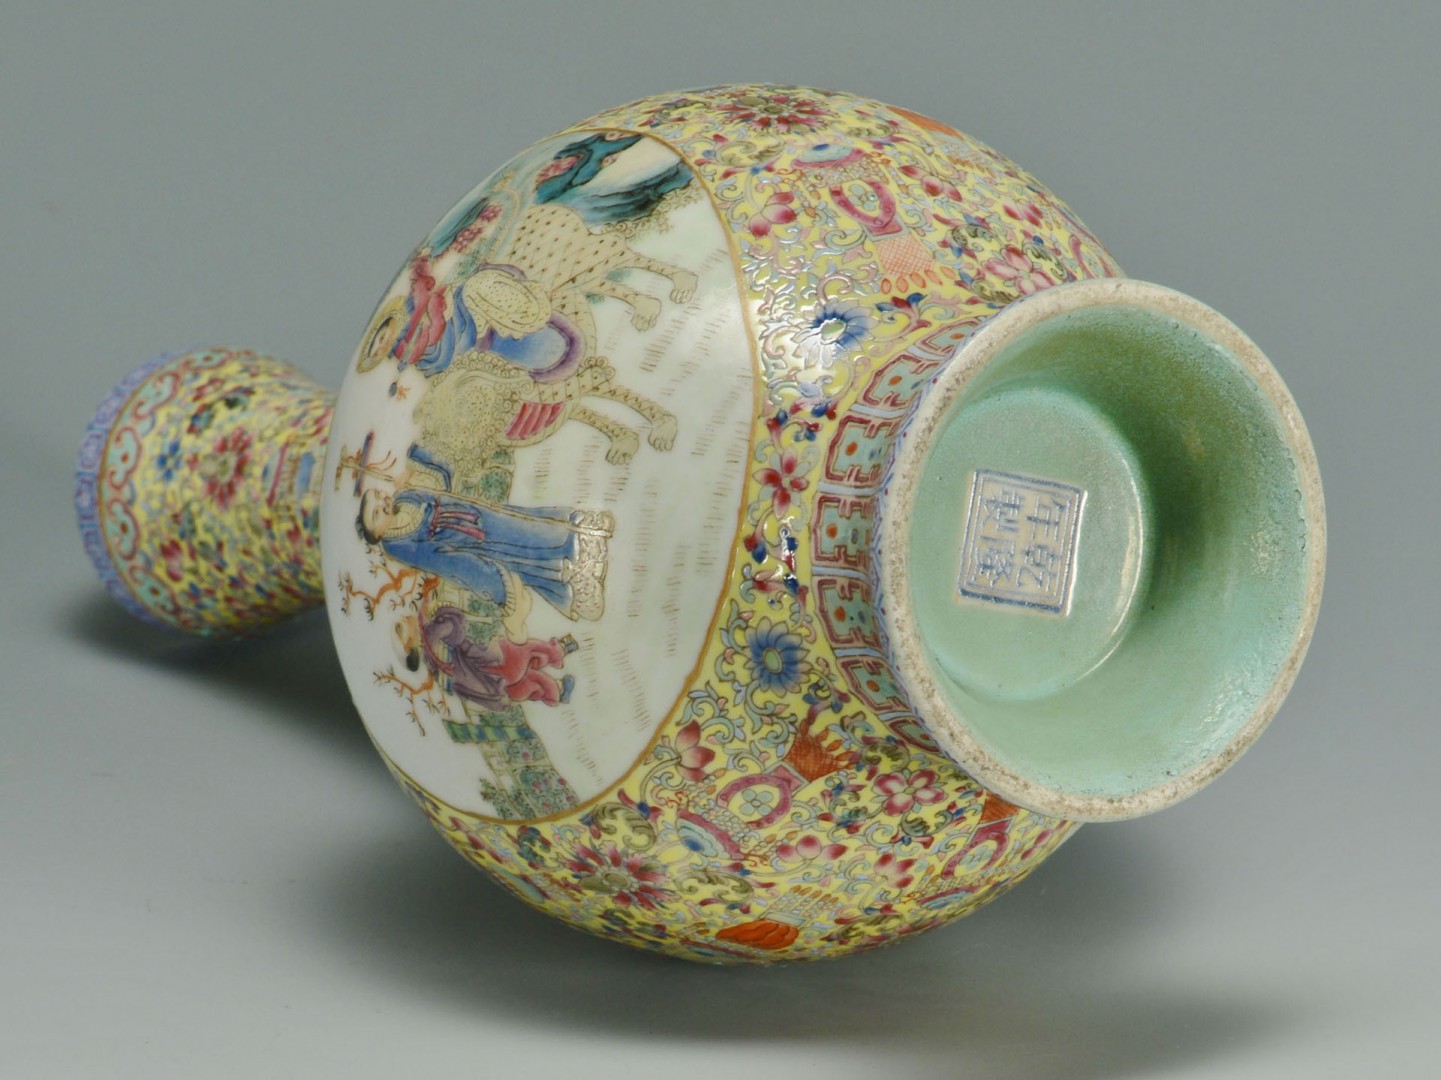 Lot 239: Chinese Famille Rose Porcelain Vase, Yellow Ground